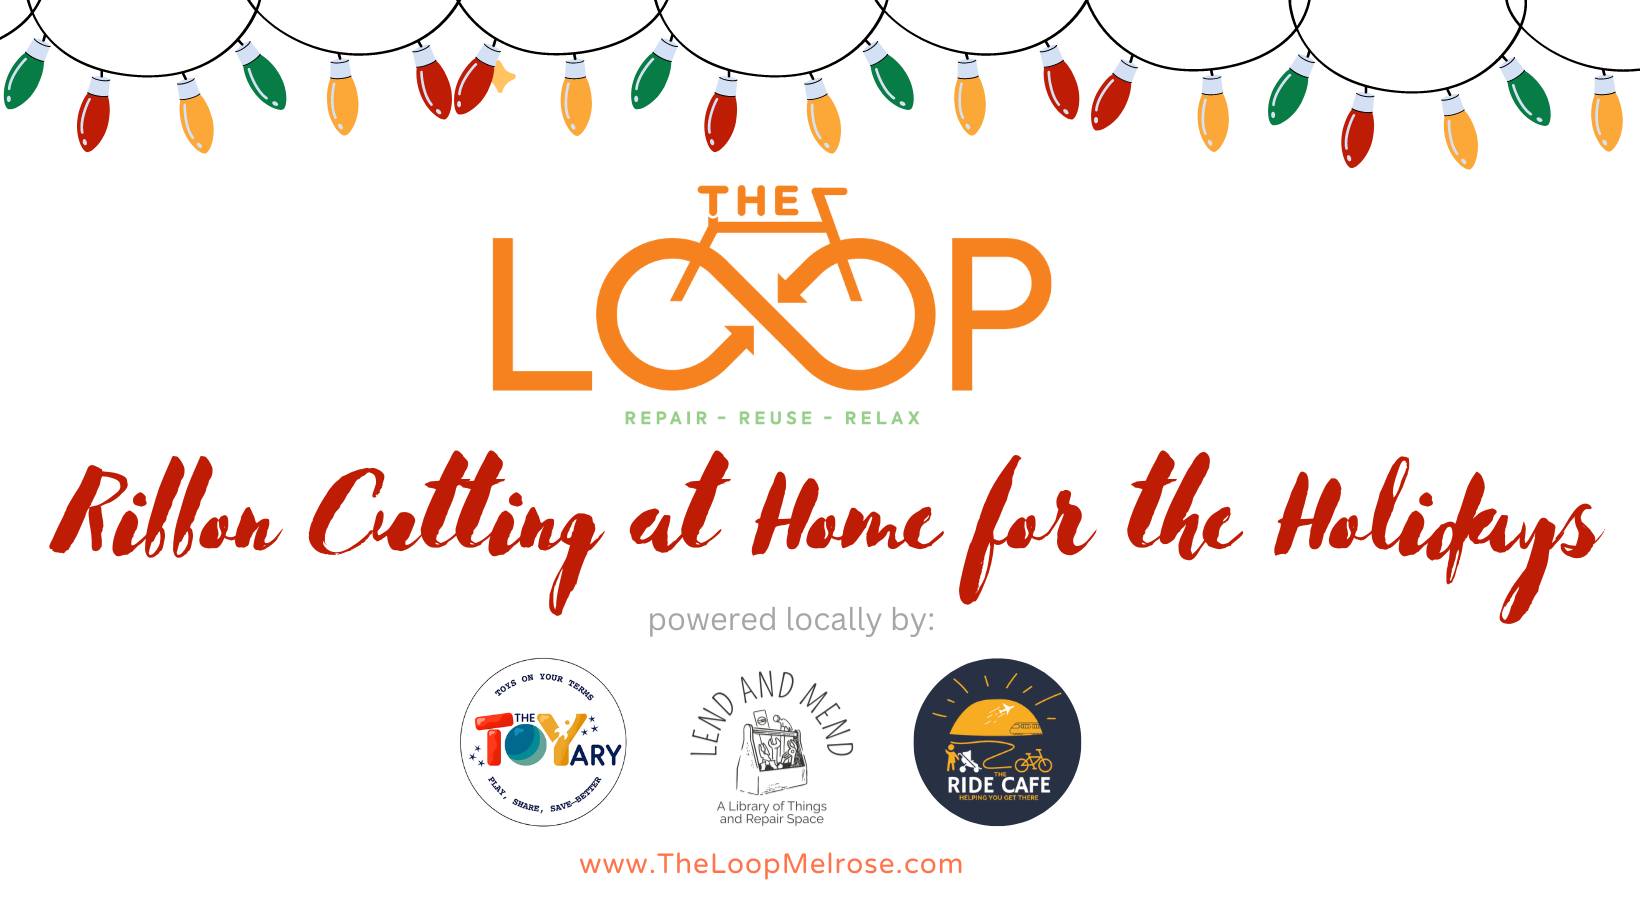 Ribbon-Cutting ceremony at The Loop